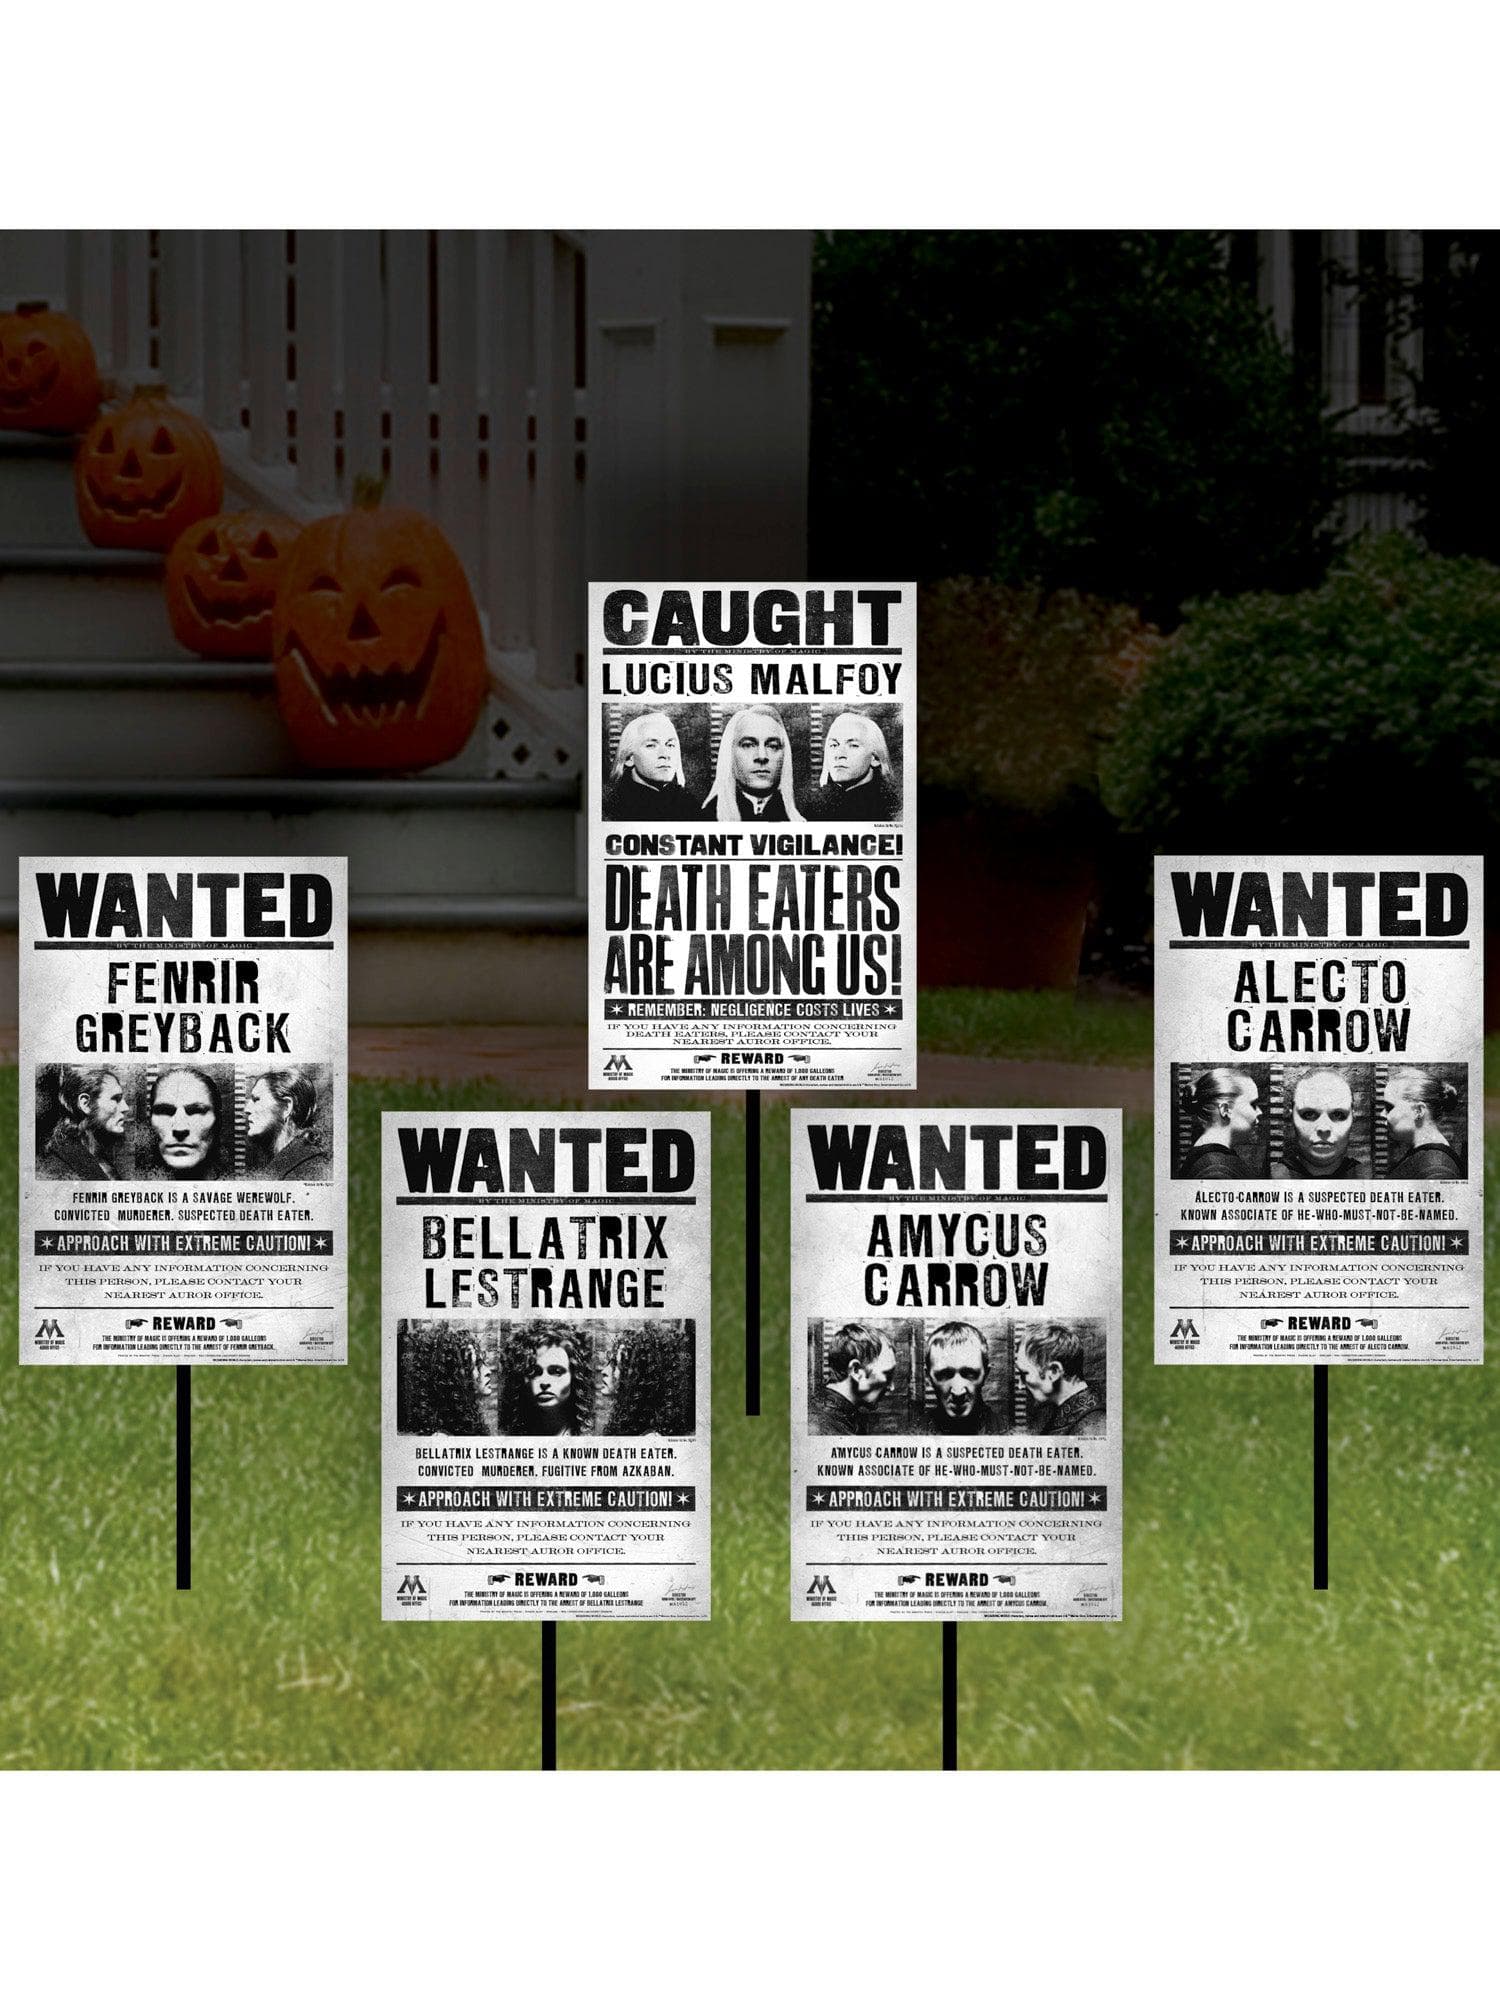 Harry Potter Wanted Signs Lawn Decoration - costumes.com